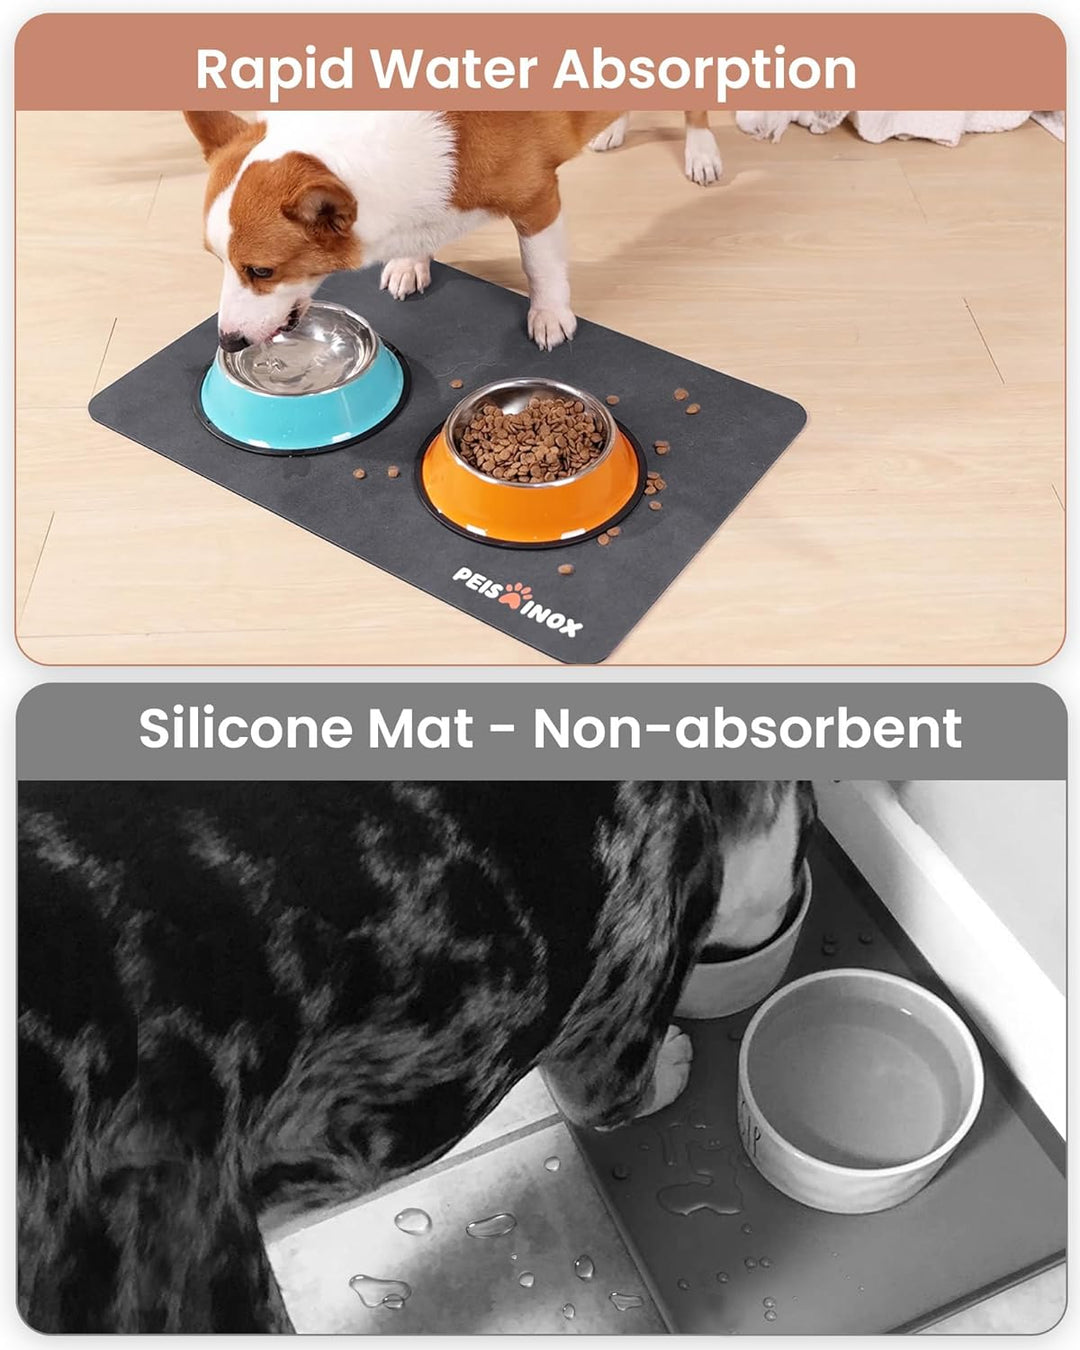 Cat Dog Food Mat, Rapid Water Absorption Dog Mat for Food and Water,100% Waterproof Cat Dog Bowl Mat, Pet Food Mat for Messy Drinkers to Protect Floors, Pet Accessories Supplies